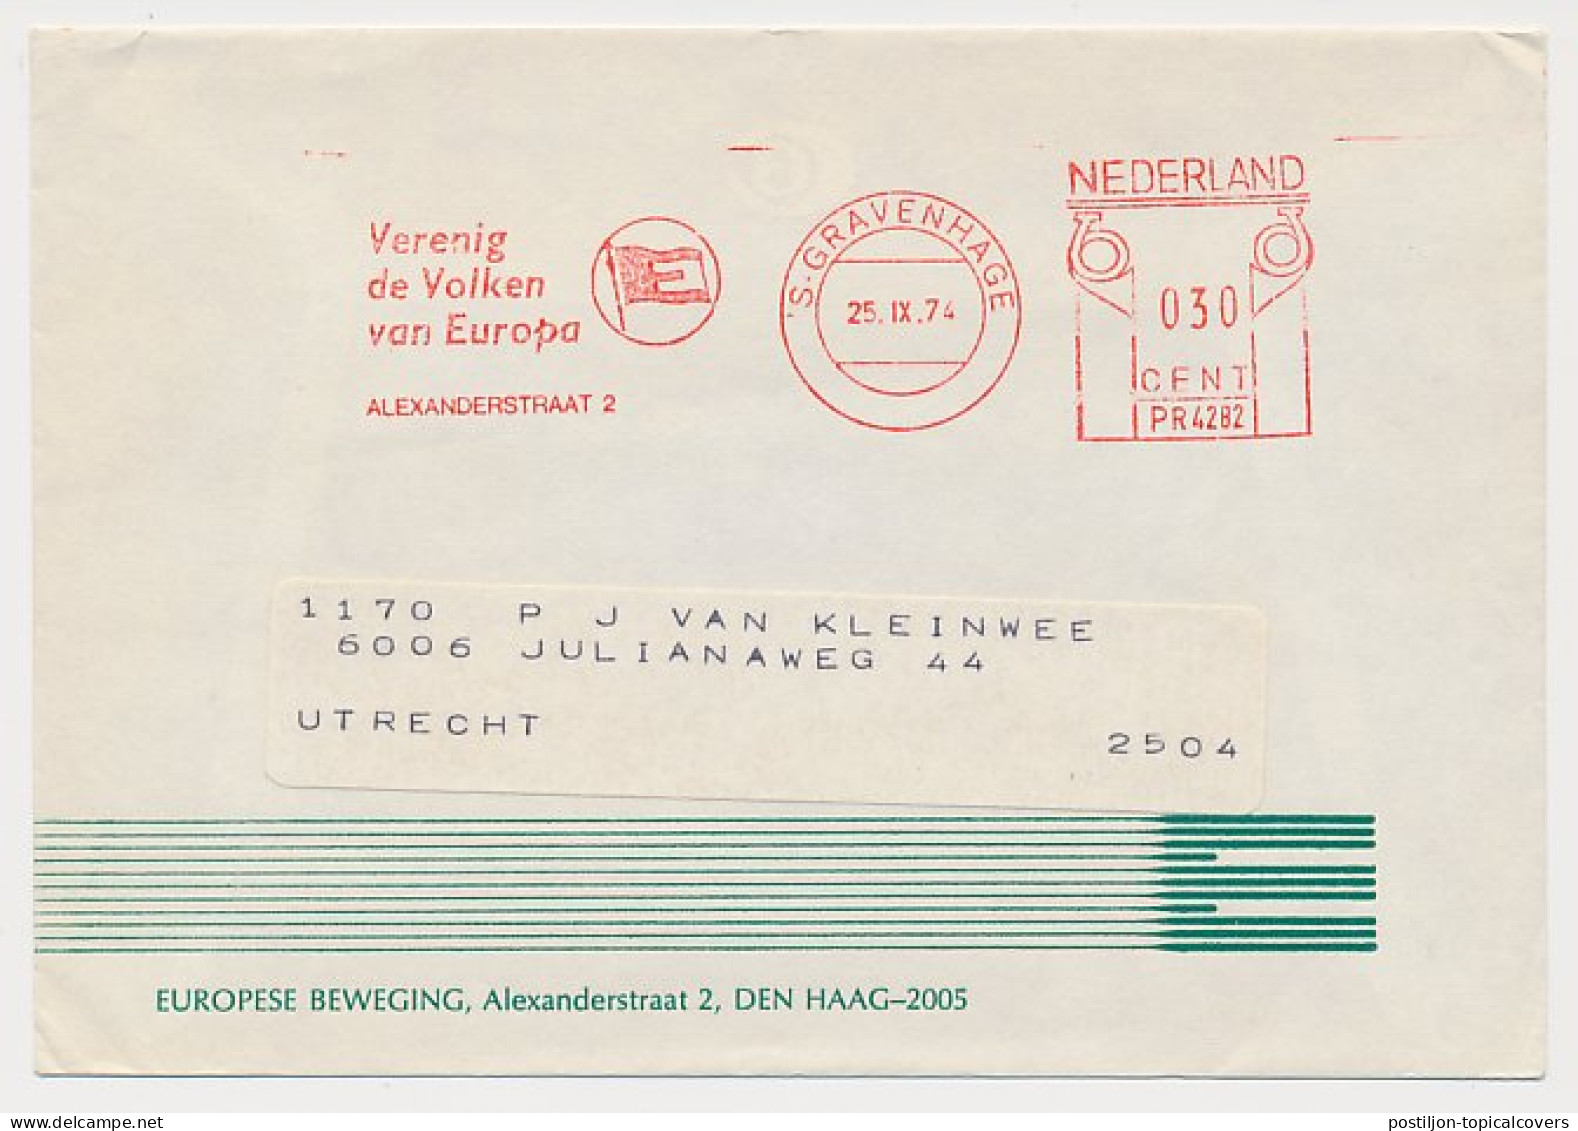 Meter Cover Netherlands 1974 Unite The Peoples Of Europe - European Movement - The Hague - European Community